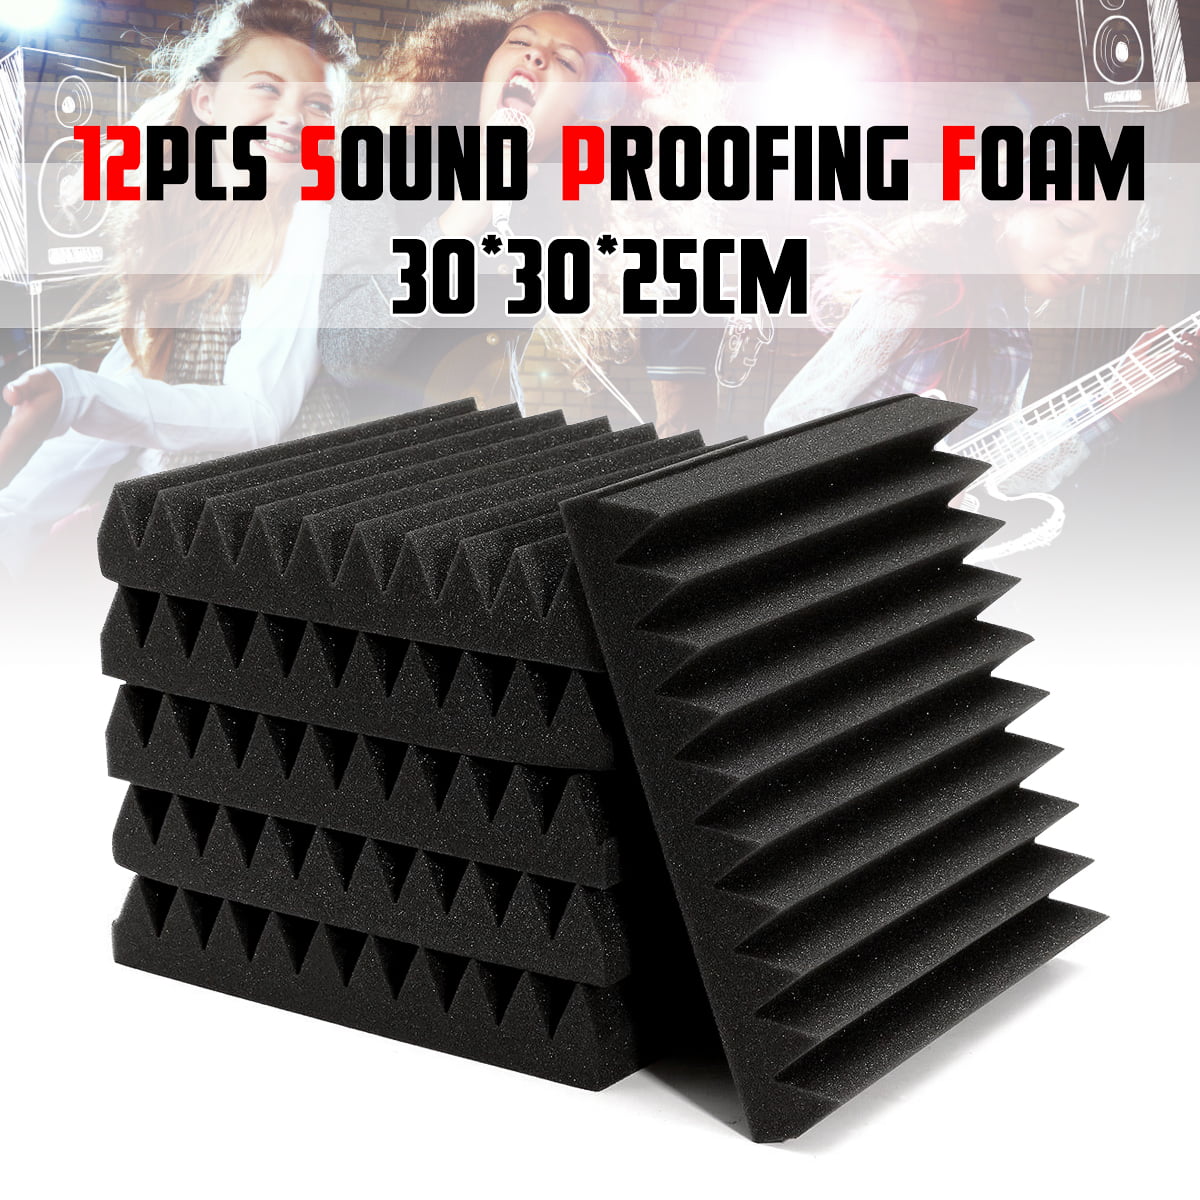 Woven Sound Acoustic Absorption Panels Zero Emission Sound Proofing Flame Retardant Panels 12 X 12 X 0.4 Inches 12 Packs Use for Wall Decoration and Acoustic Treatment Black 